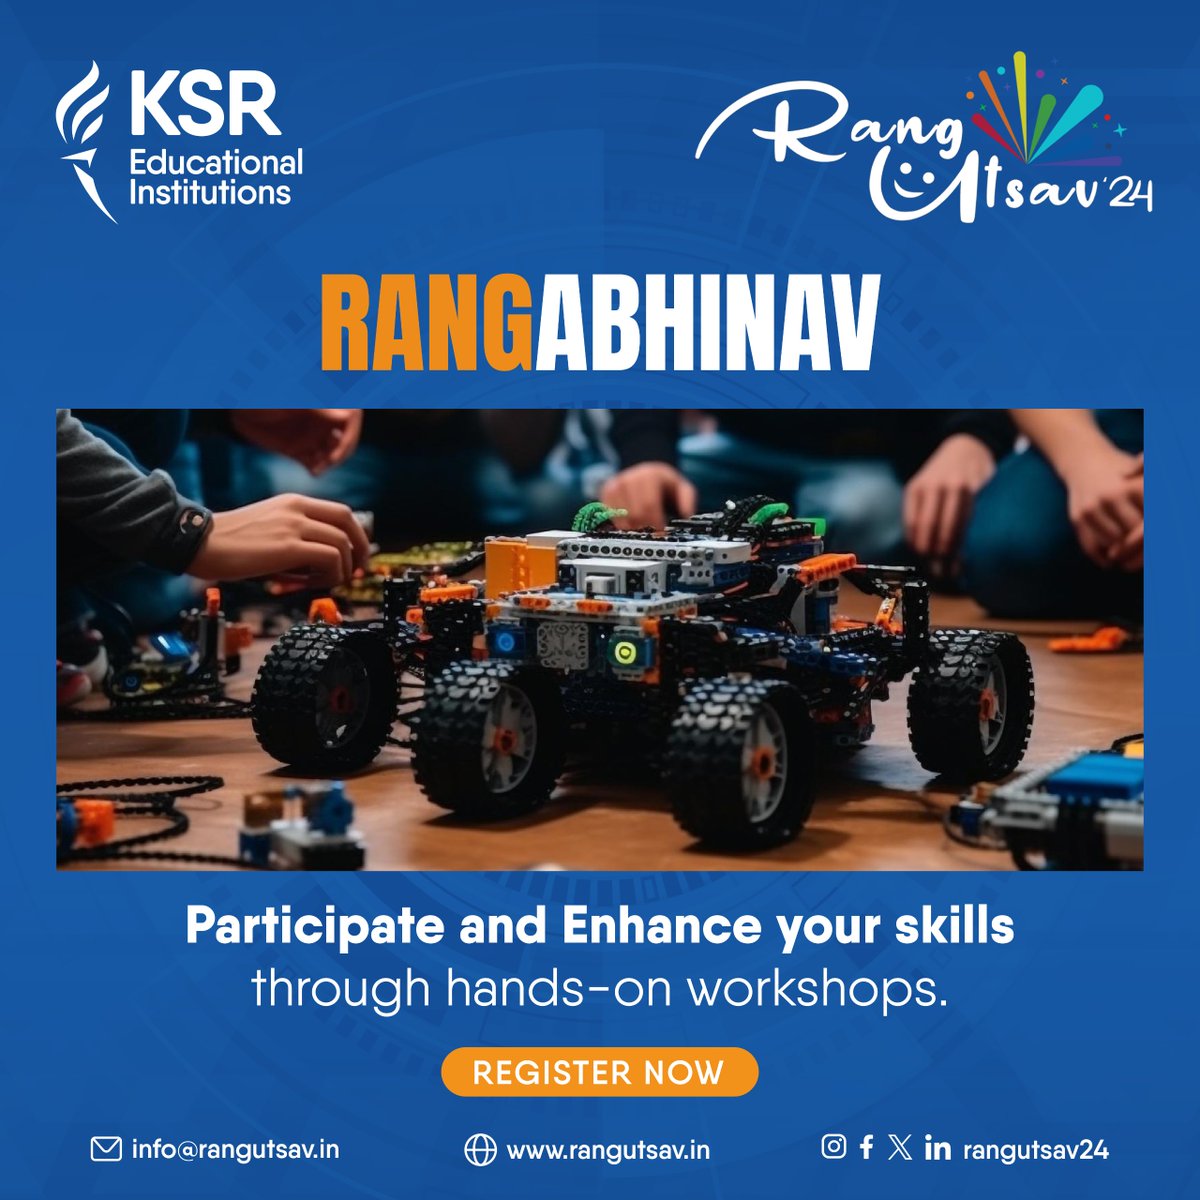 Ready to redefine tech excellence? Join us at RangAbhinav, where minds collide and innovation ignites! Let the Technical Workshop be your canvas for mastering the art of technology. #RangAbhinav #TechMasters #InnovationCanvas #RangUtsav #KSR #WeLoveKSR #rangutsav24 #technofest